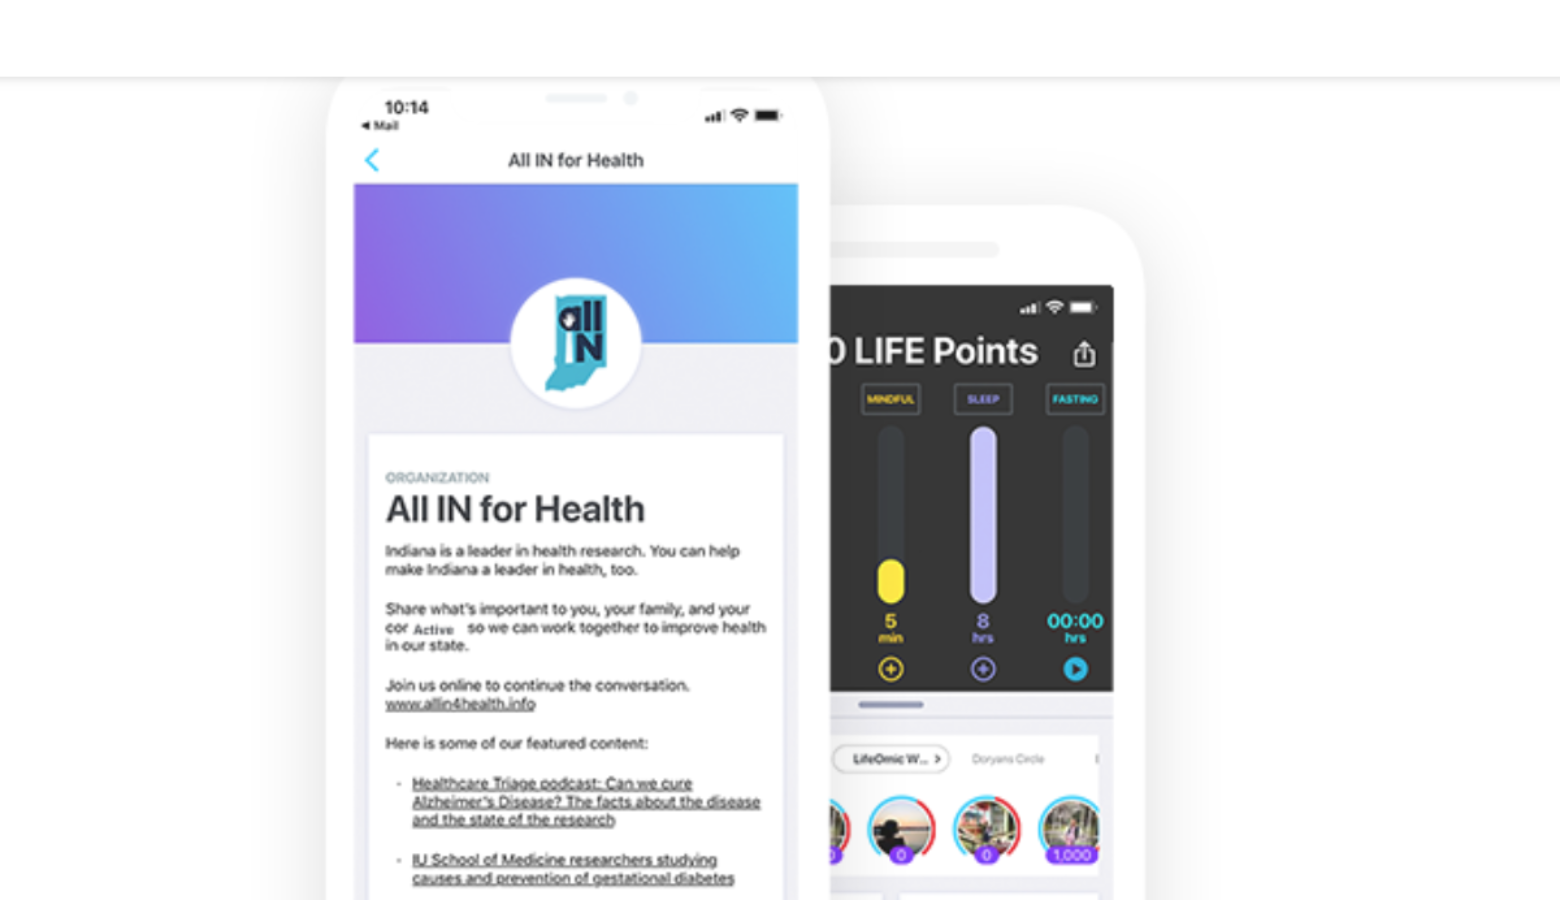 Developers say this mobile app makes choosing healthy options – like excerising, eating nutritious food and getting good sleep – like a game. (Courtesy of All IN for Health)